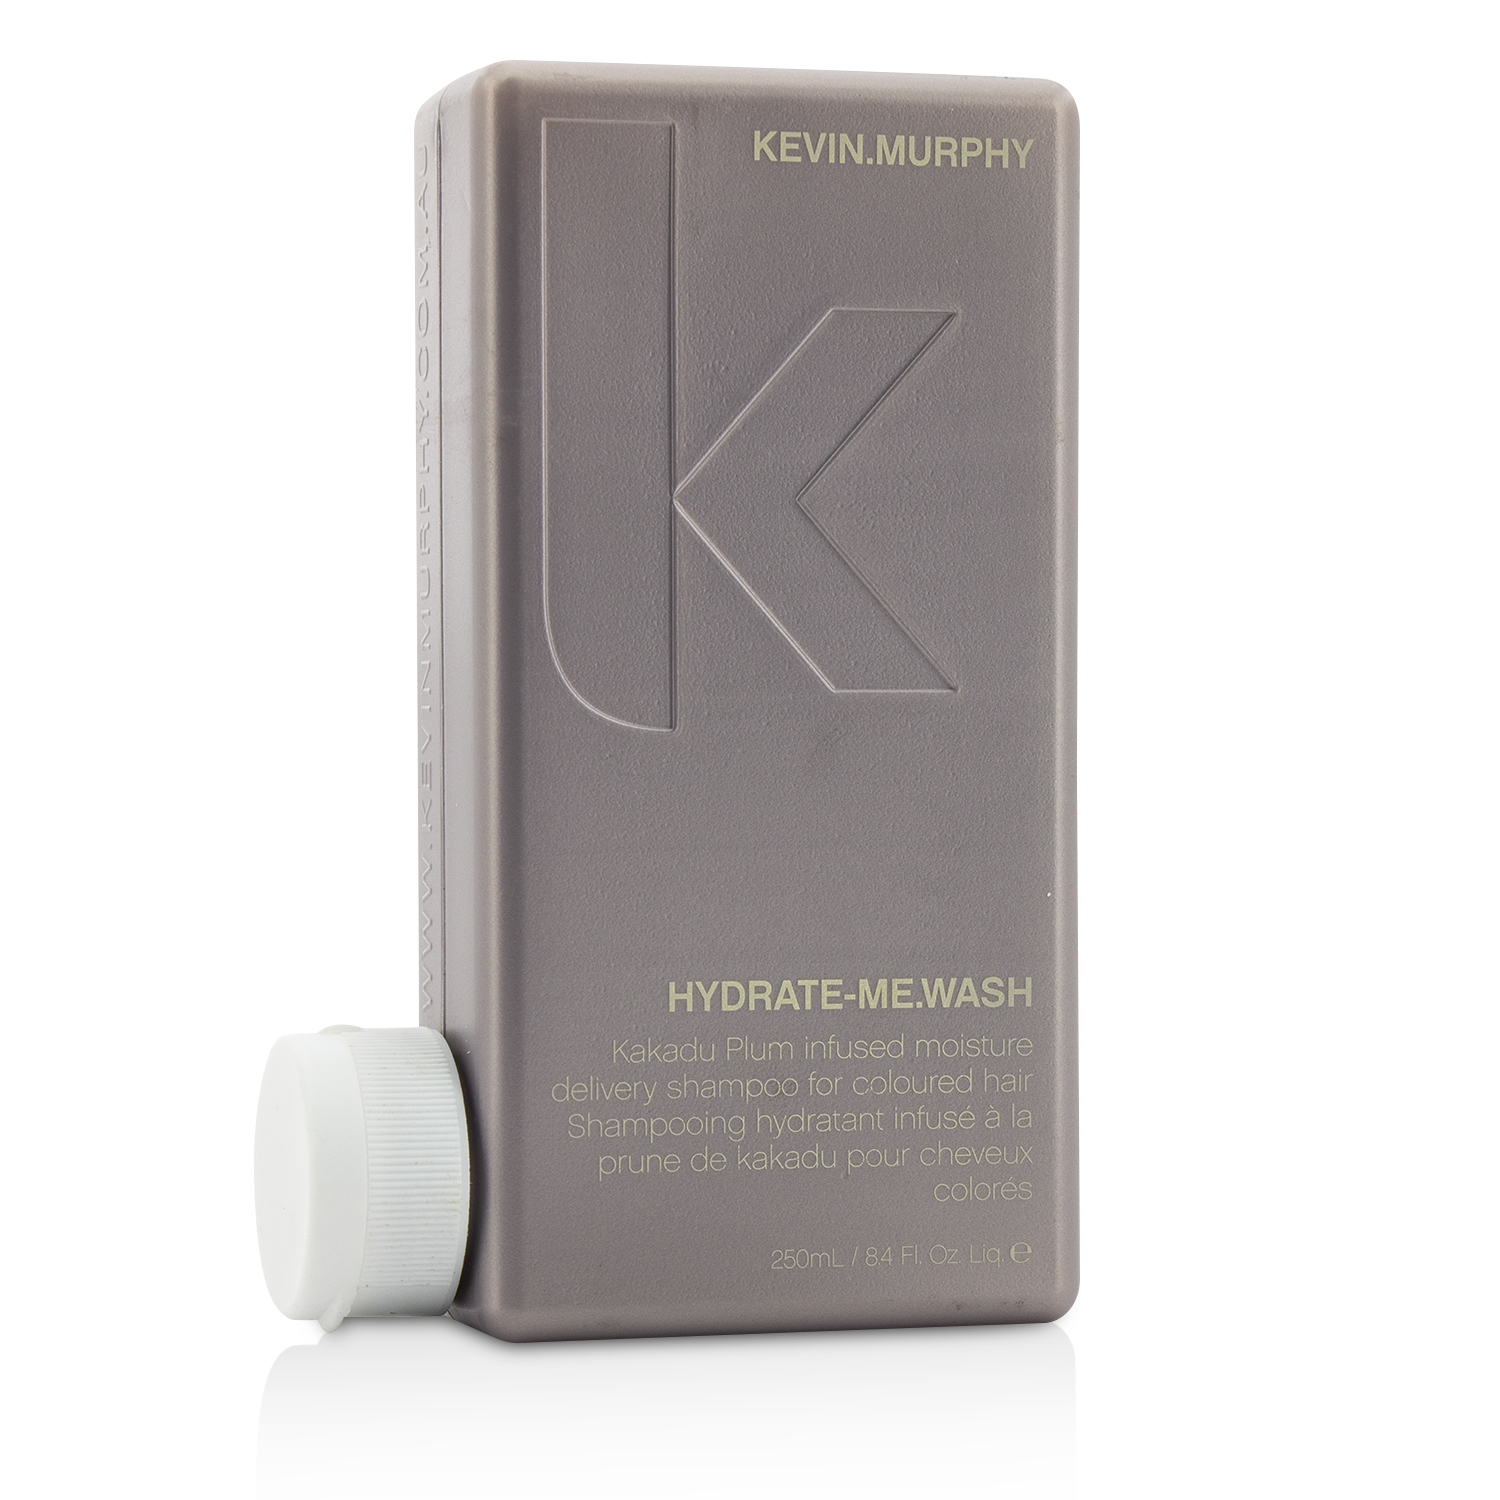 Hydrate-Me.Wash (Kakadu Plum Infused Moisture Delivery Shampoo - For Coloured Hair) Kevin.Murphy Image